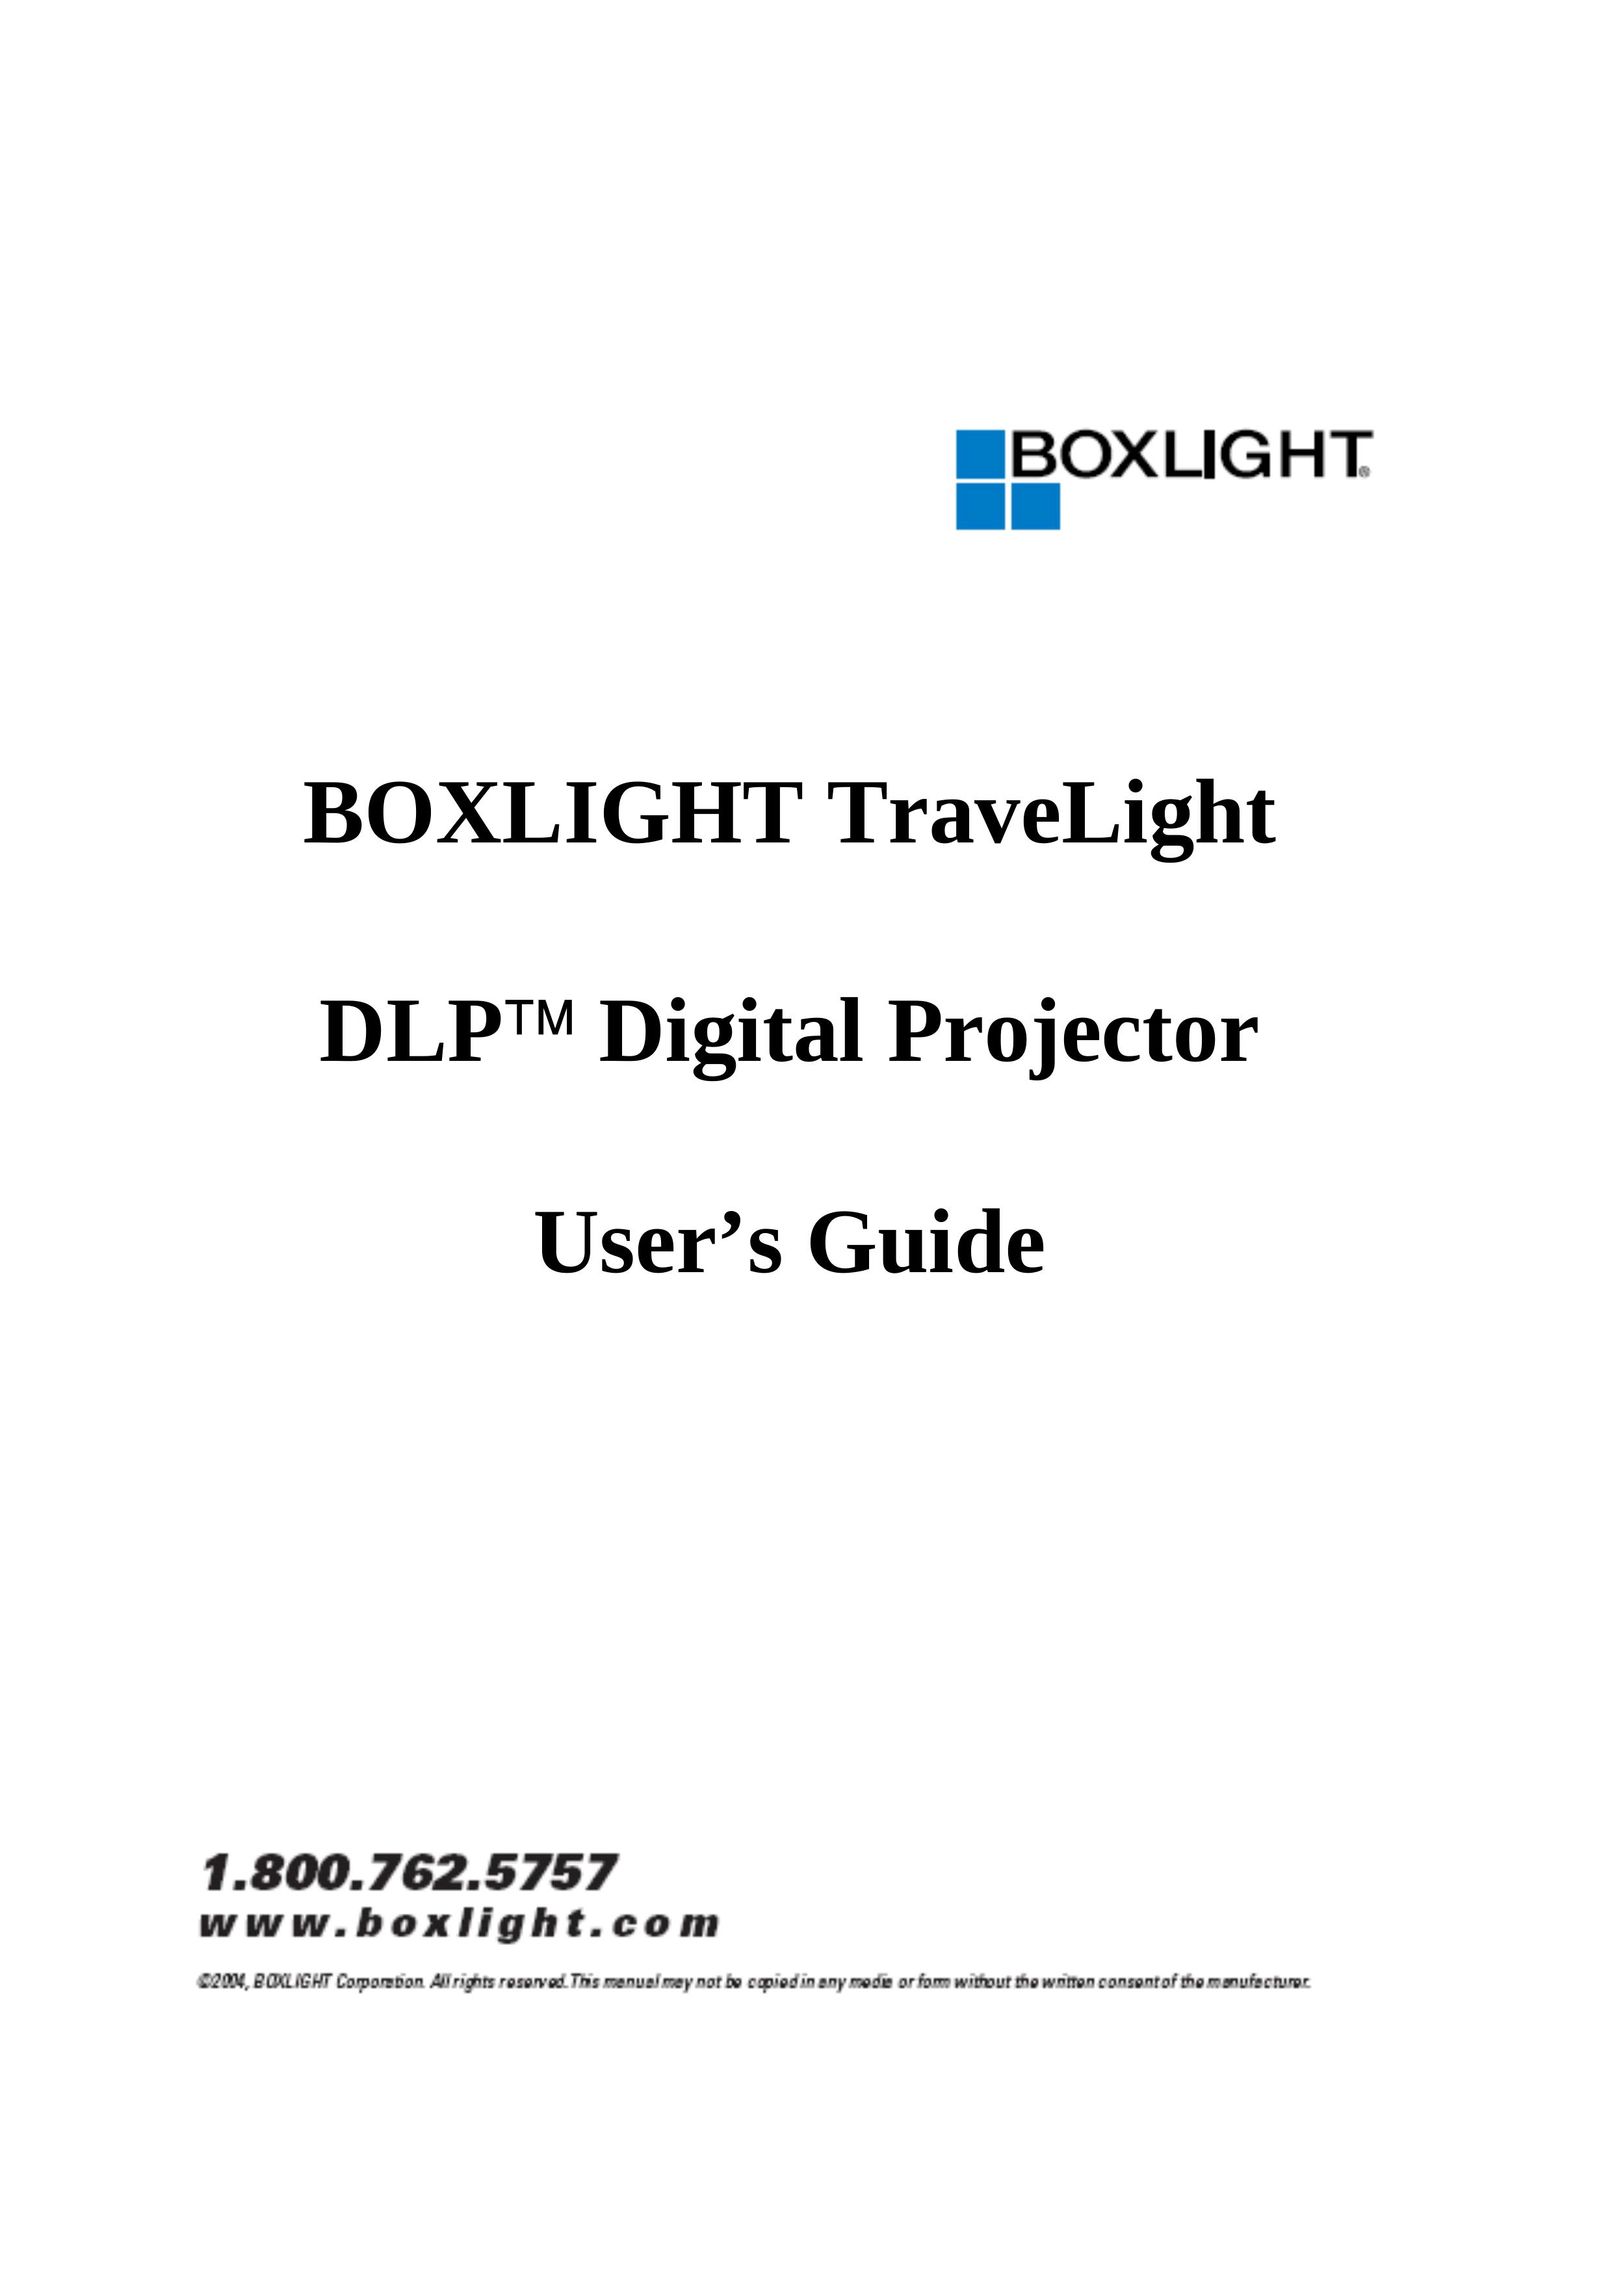 BOXLIGHT DLP Projection Television User Manual